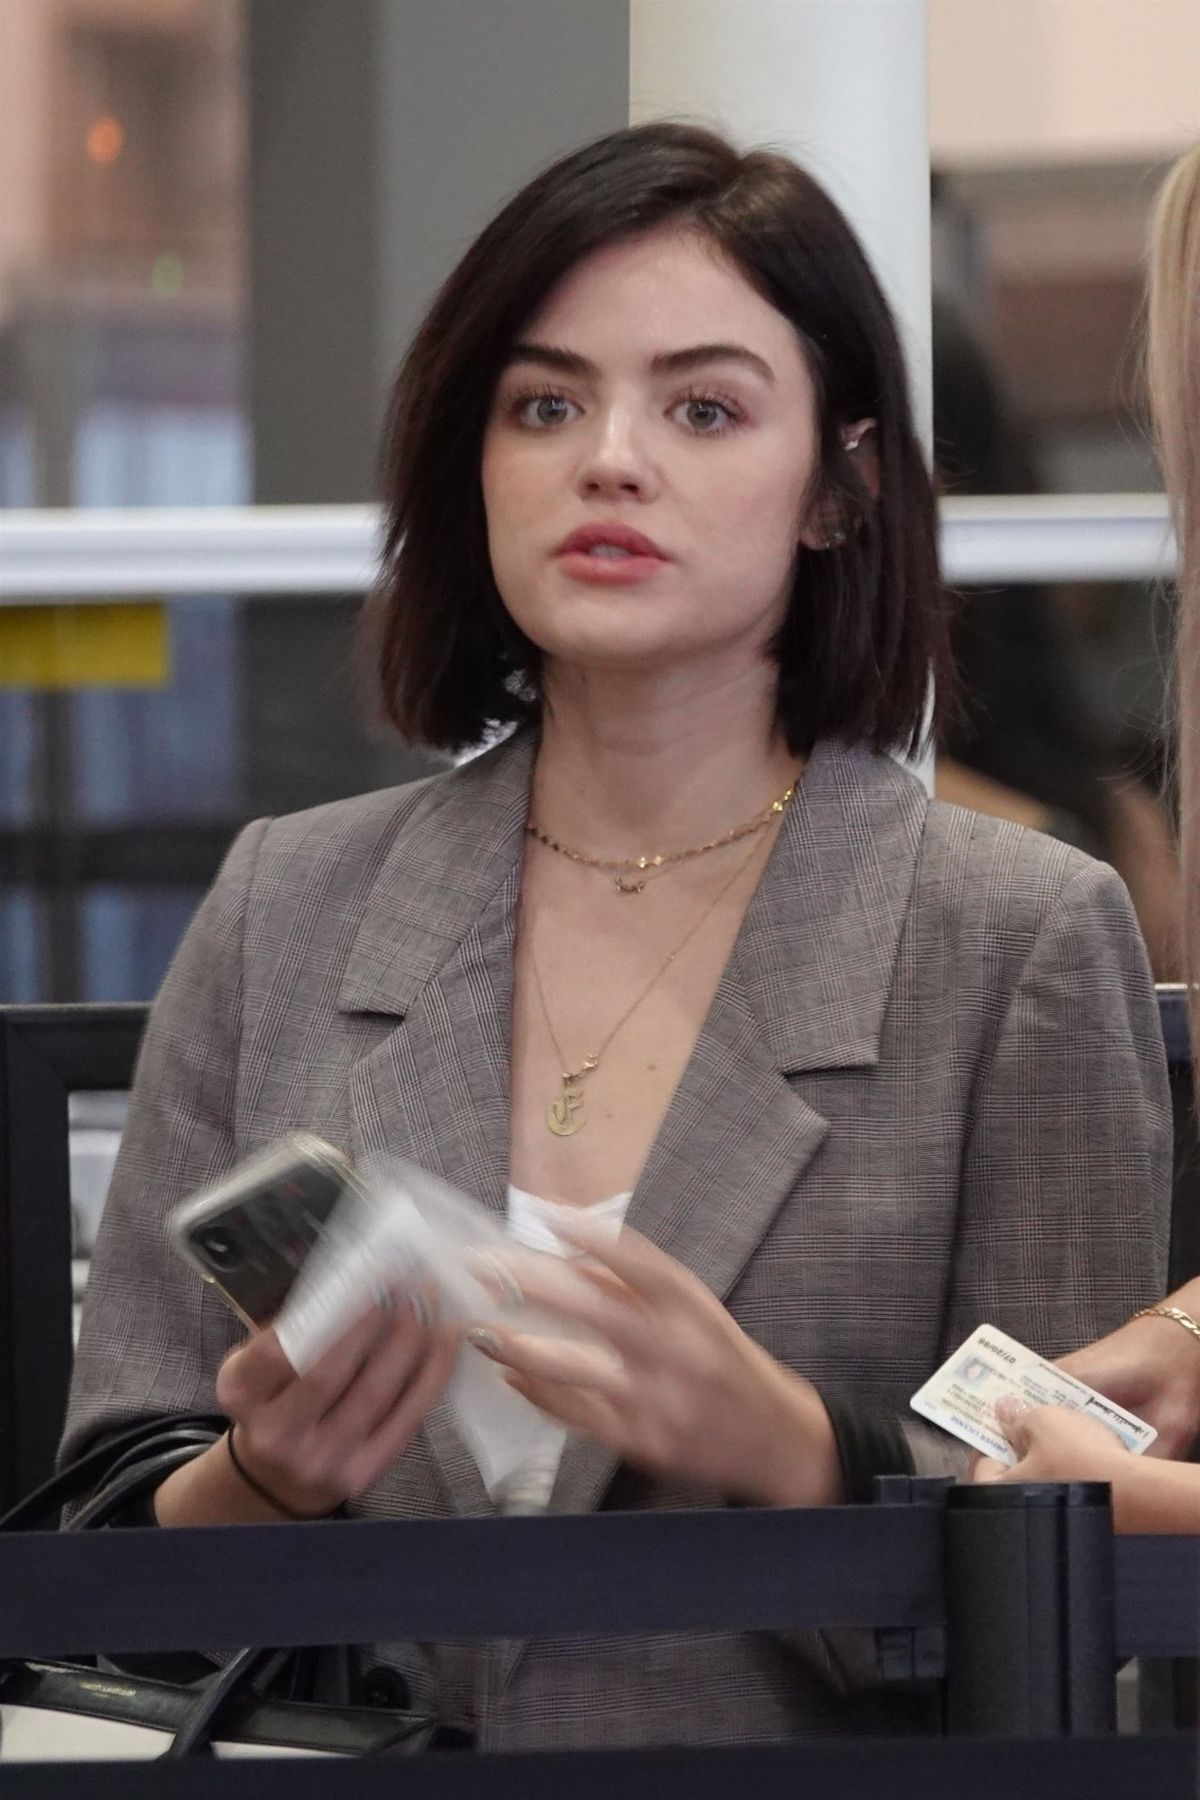 LUCY HALE at LAX Airport in Los Angeles 09/04/2018 – HawtCelebs